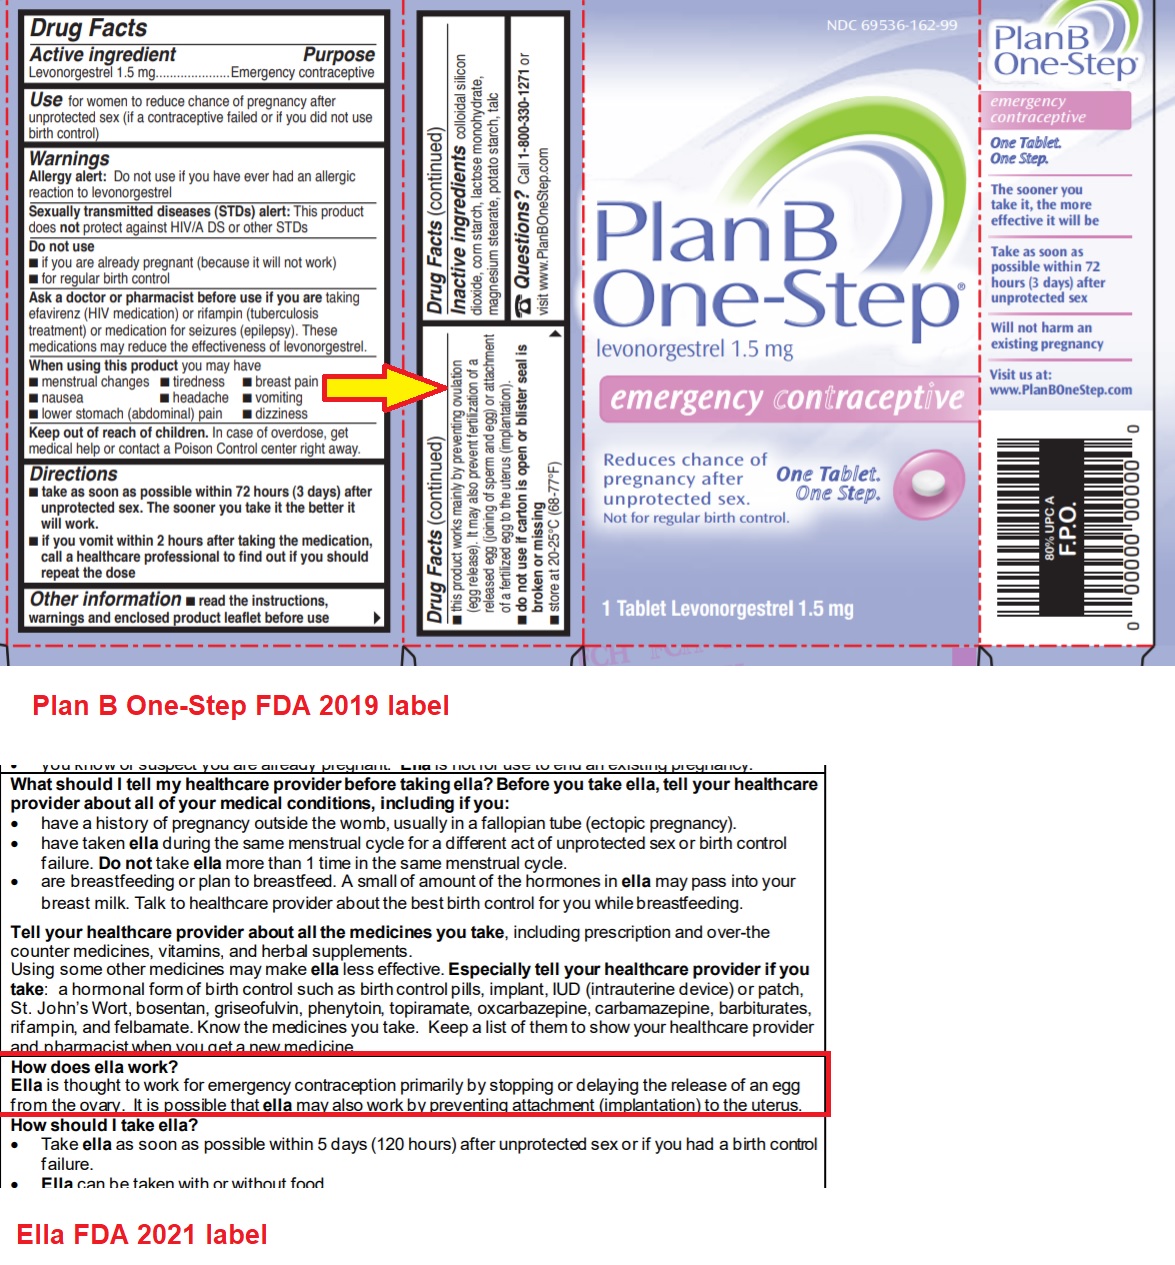 Image: Ella FA 2021 and PlanB One Step FDA 2019 labels say they can prevent fertilized egg from implanting